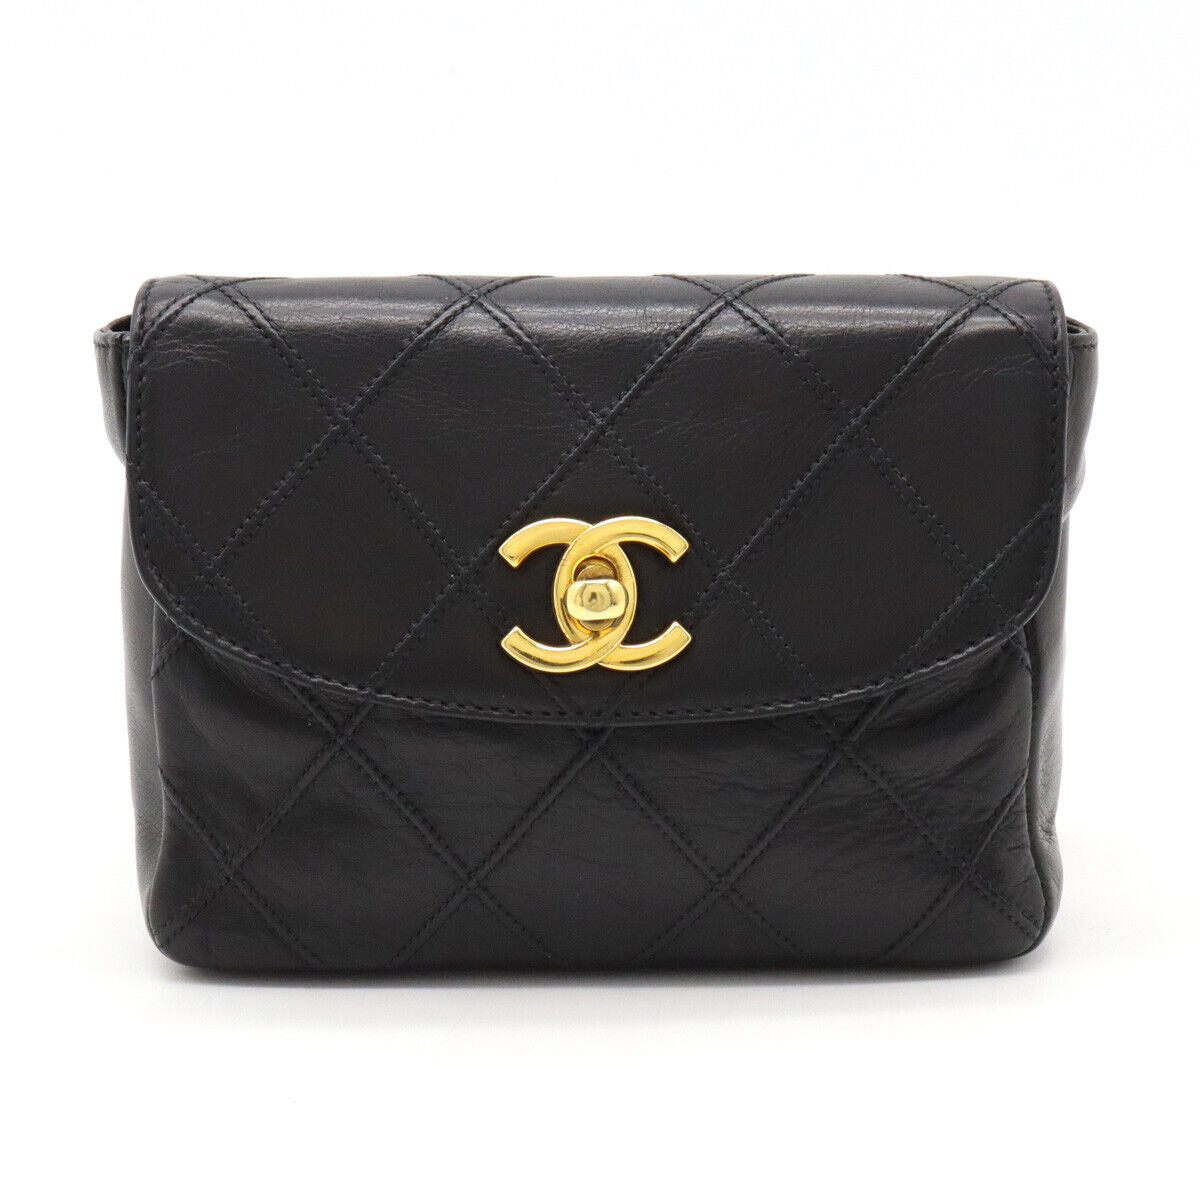 classic chanel quilted bag black